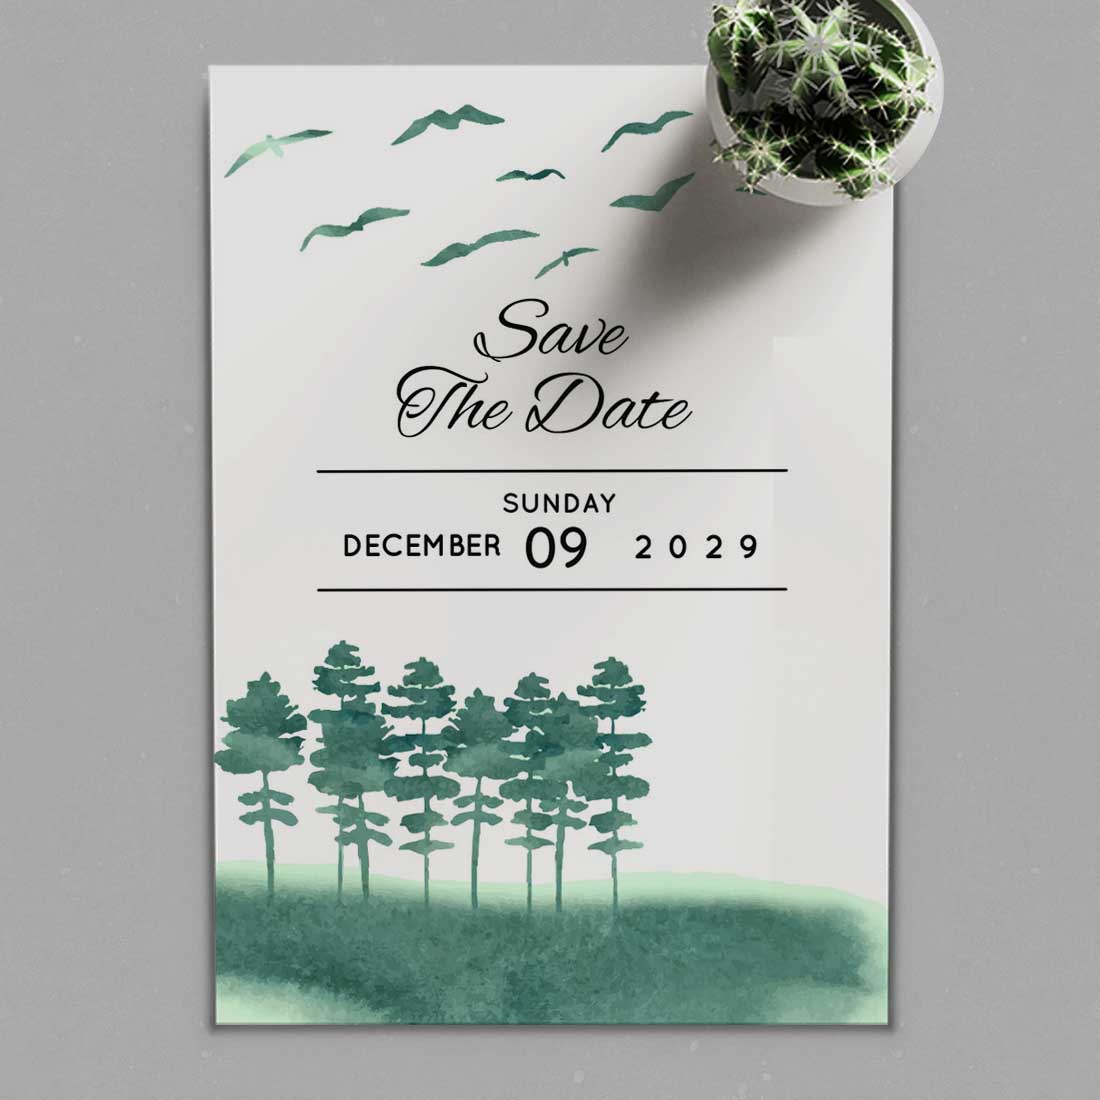 Winter Wedding Card with Mountains and Fir-tree presentation.